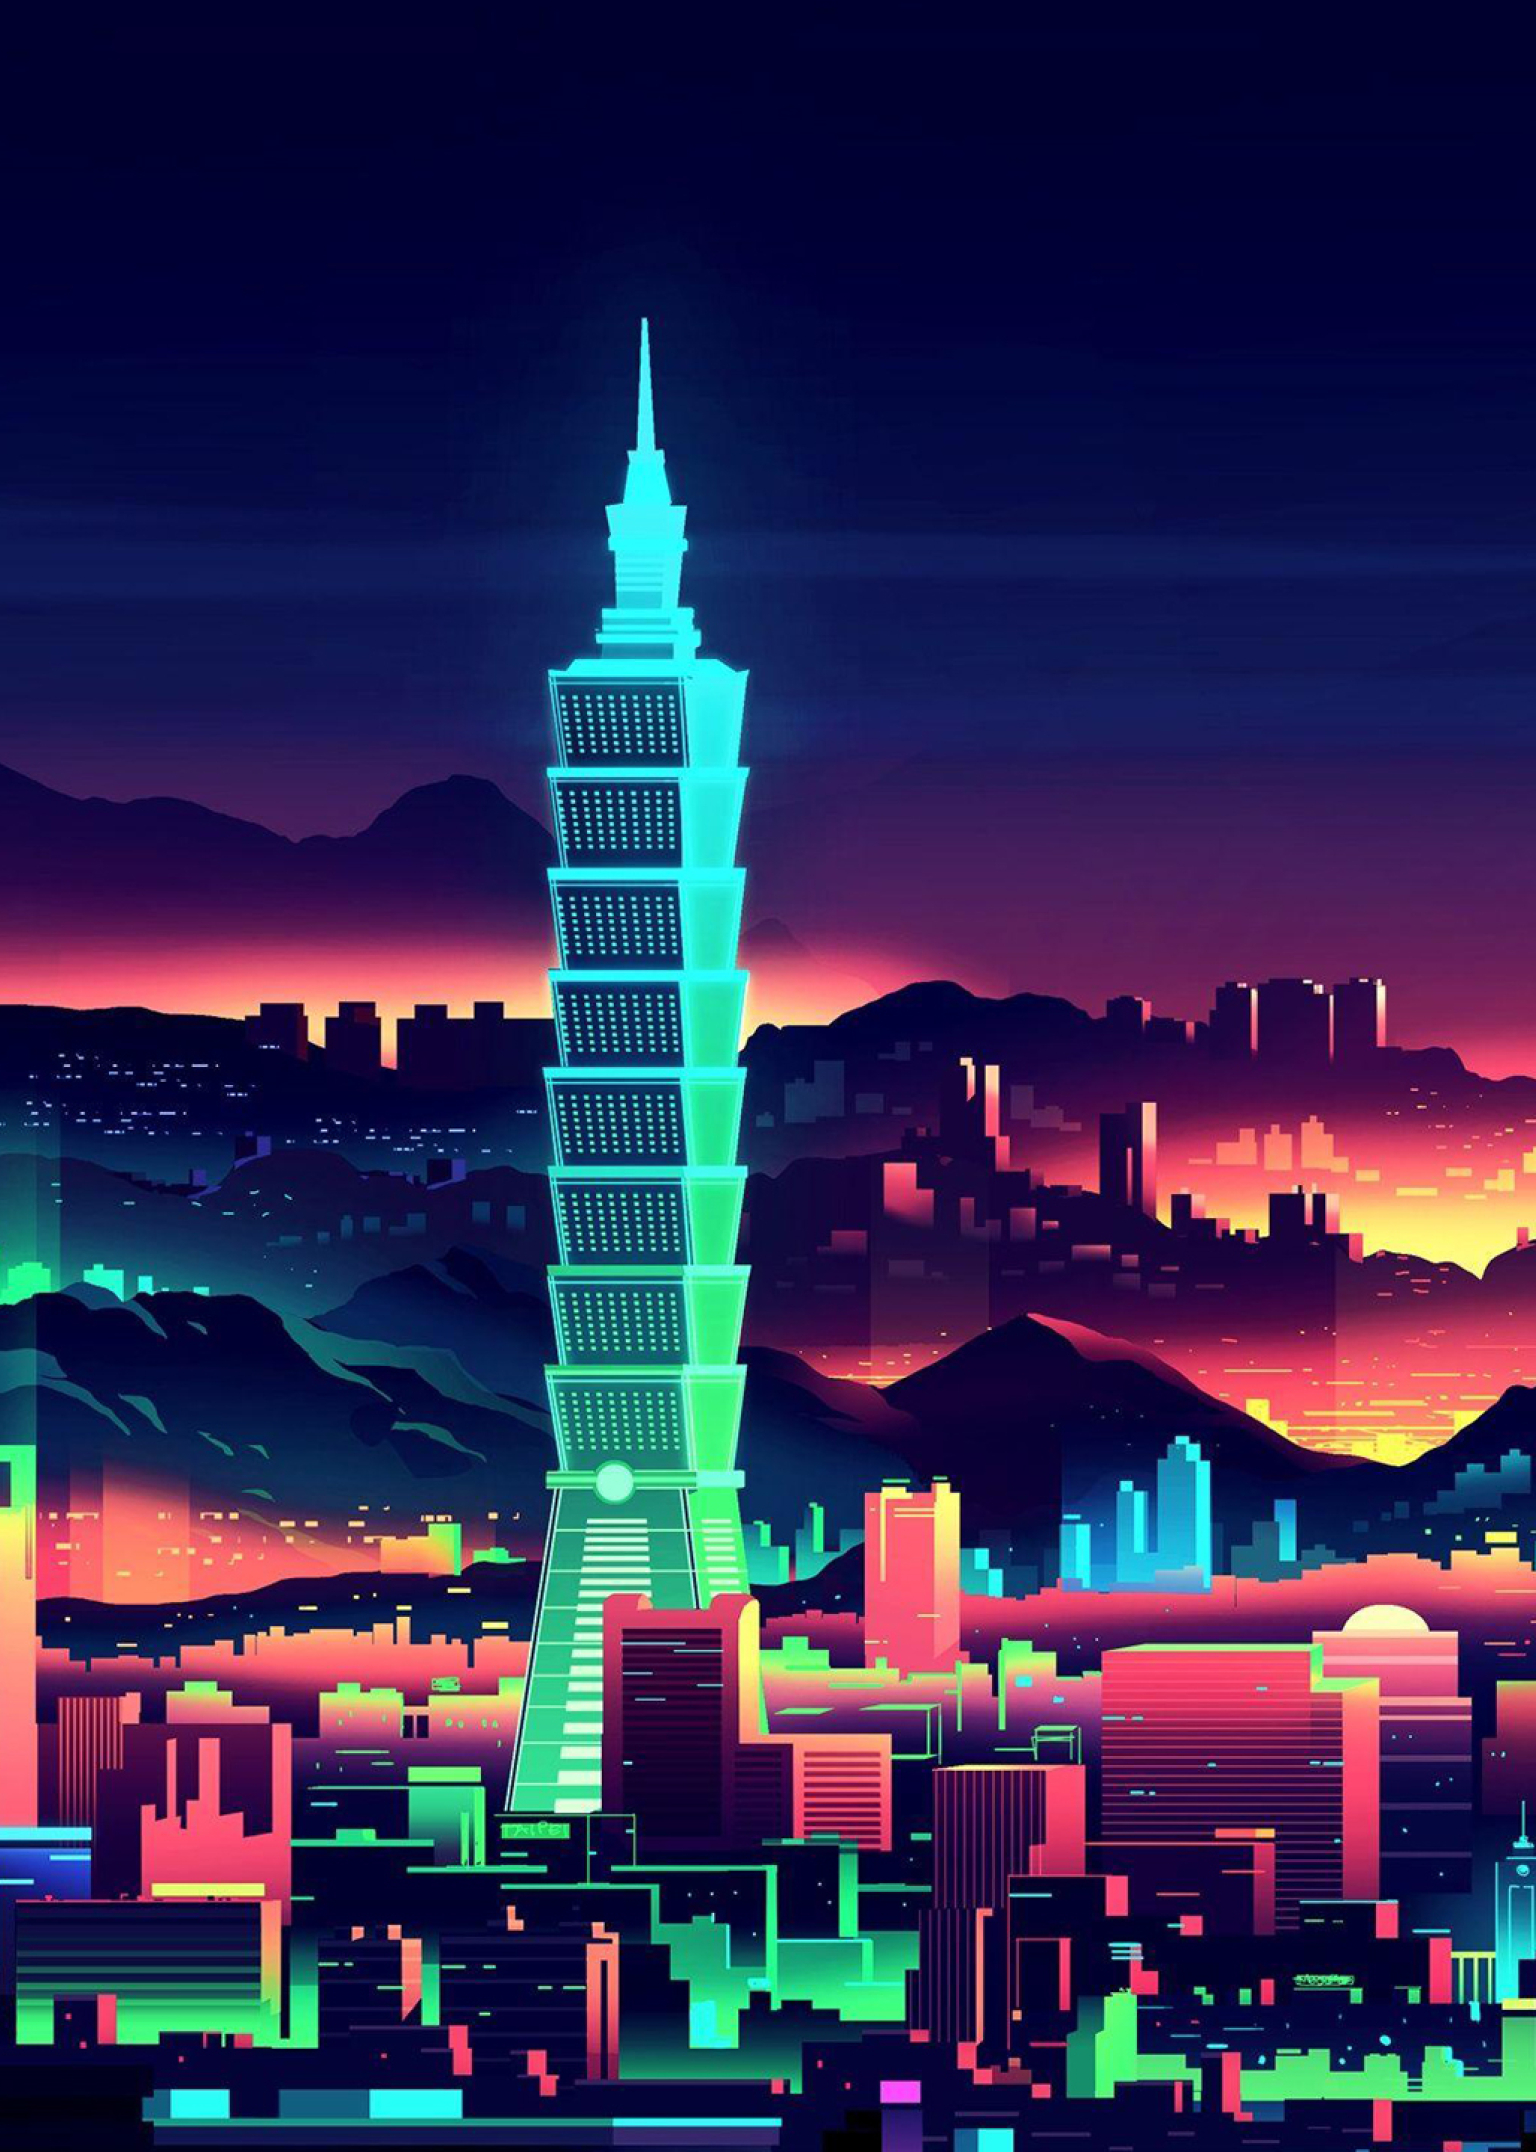 1536x2152 Vaporwave City Night 1536x2152 Resolution Wallpaper Hd Artist 4k Wallpapers Images Photos And Background Wallpapers Den